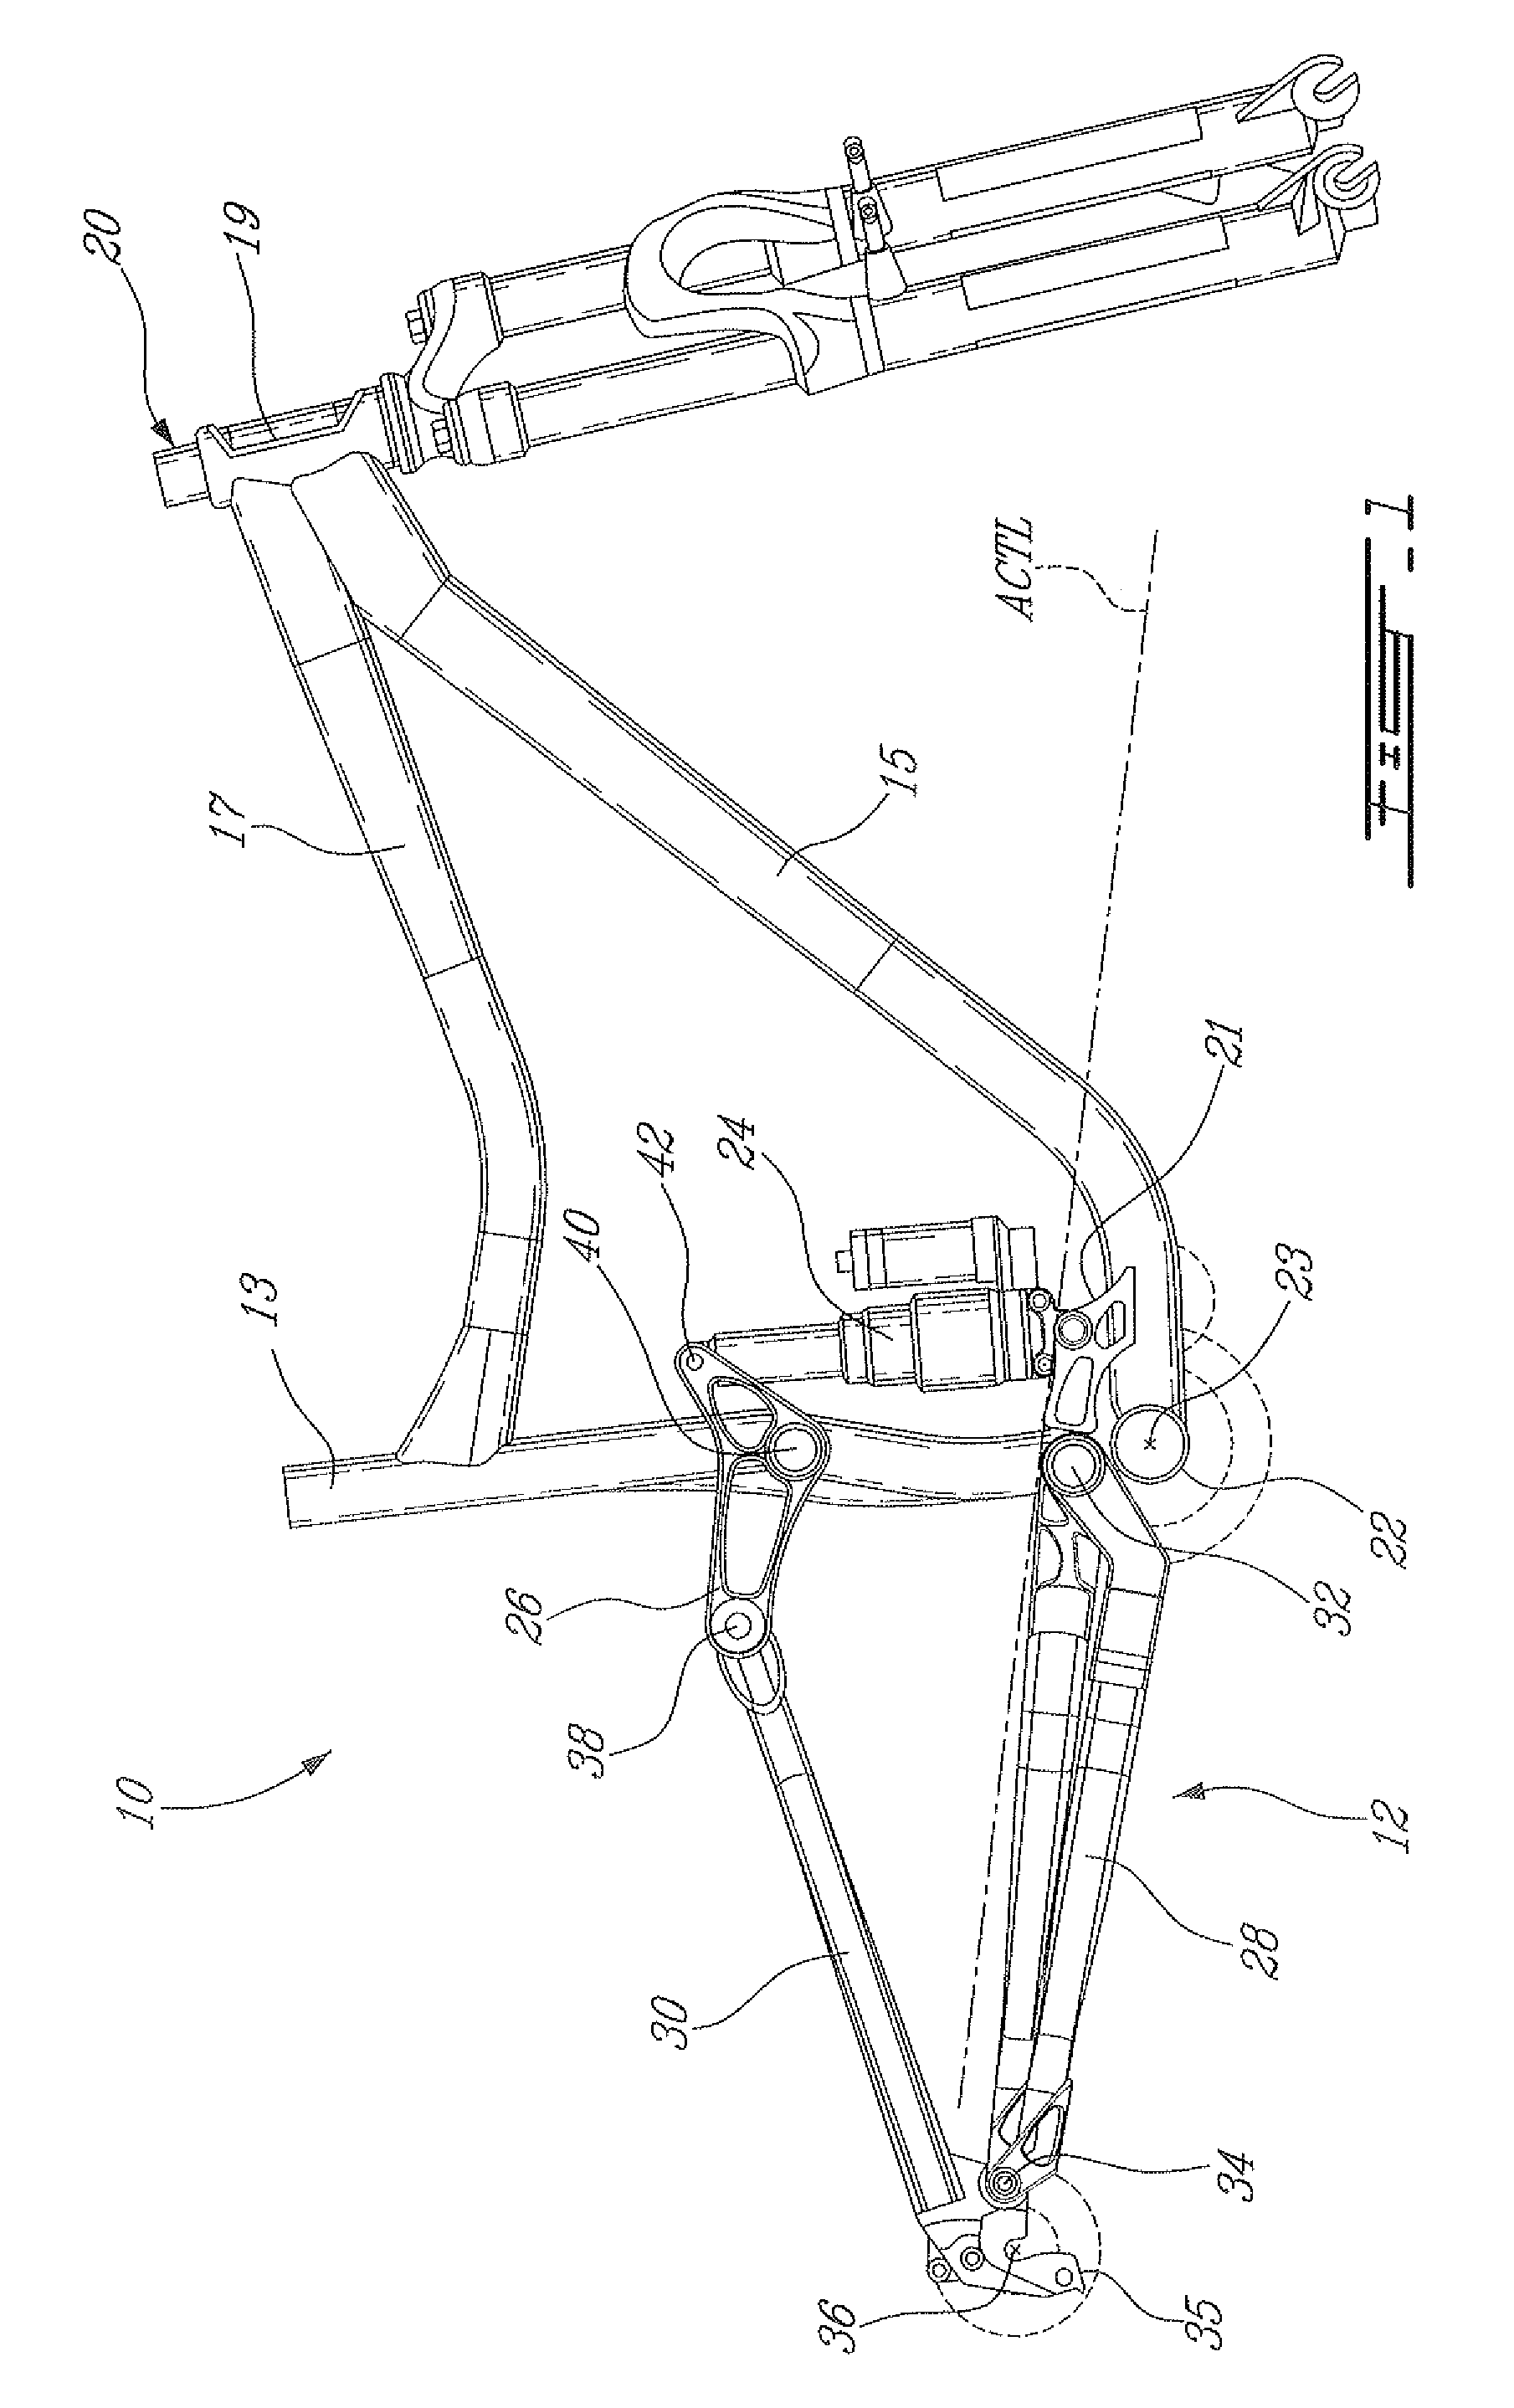 Bicycle rear suspension system